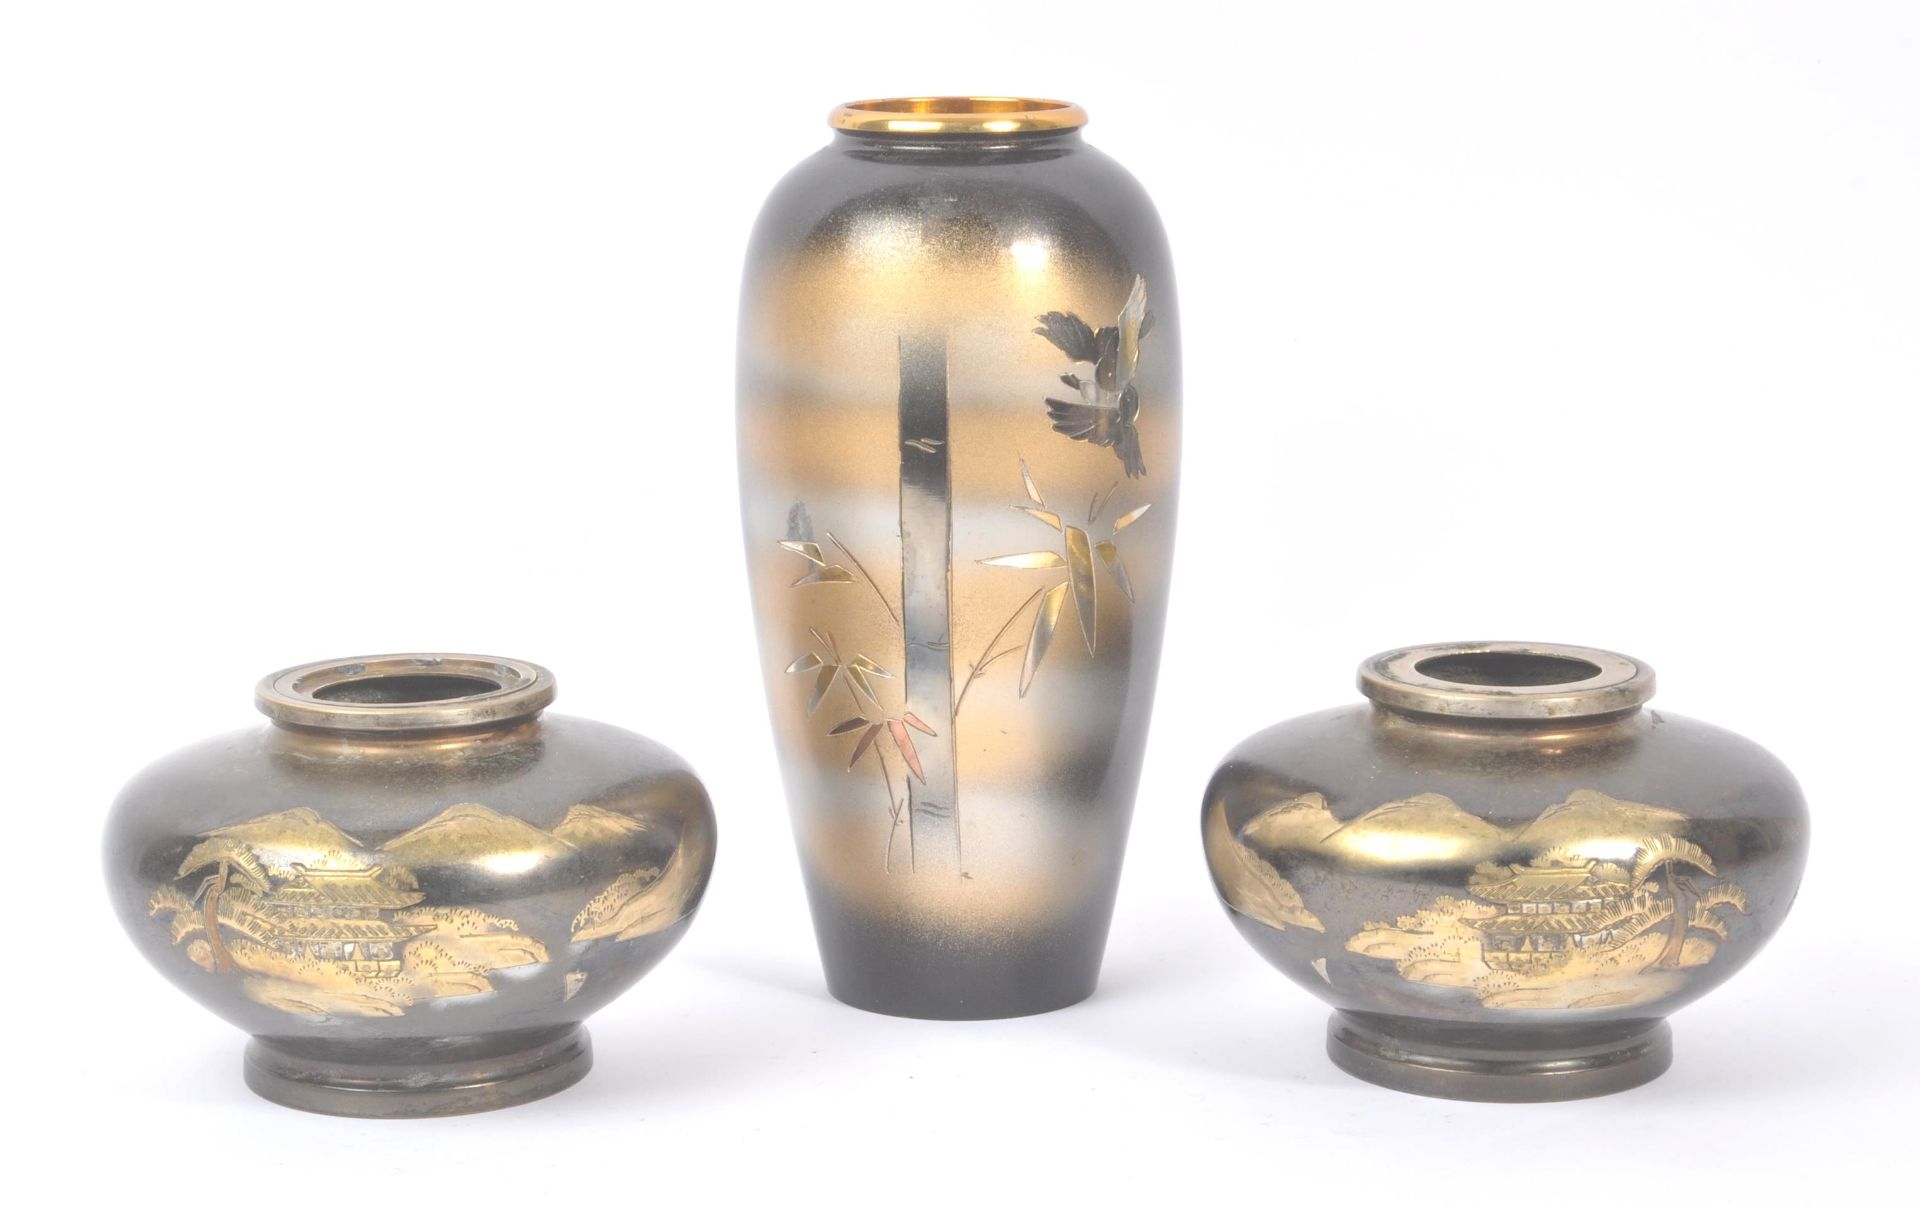 PAIR OF EARLY 20TH CENTURY JAPANESE BRASS VASES